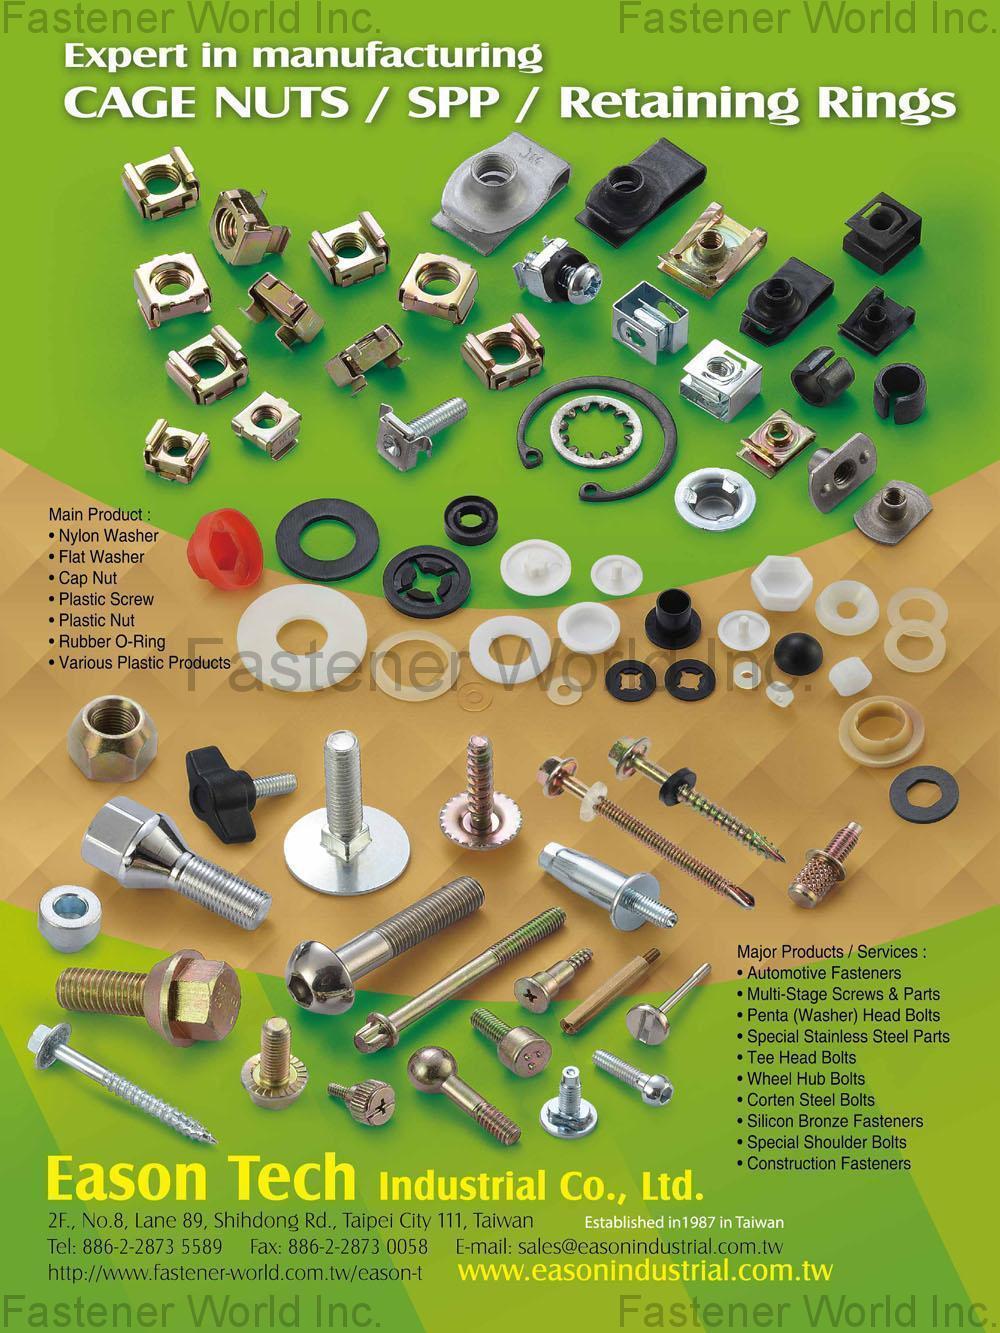 EASON TECH INDUSTRIAL CO., LTD.  , Cage Nuts / SPP / Retaining Rings, Nylon Washer, Flat Washer, Cap Nut, Plastic Screws, Plastic Nuts, Rubber O-Ring, Various Plastic Products, Automotive Fasteners, Multi-Stage Screws & Parts, Penta (Washer) Head Bolts, Special Stainless Steel Parts, Tee Head Bolts, Wheel Hub Bolts, Corten Steel Bolts, Silicon Bronze Fasteners, Special Shoulder Bolts, Construction Fasteners , Cage Nuts